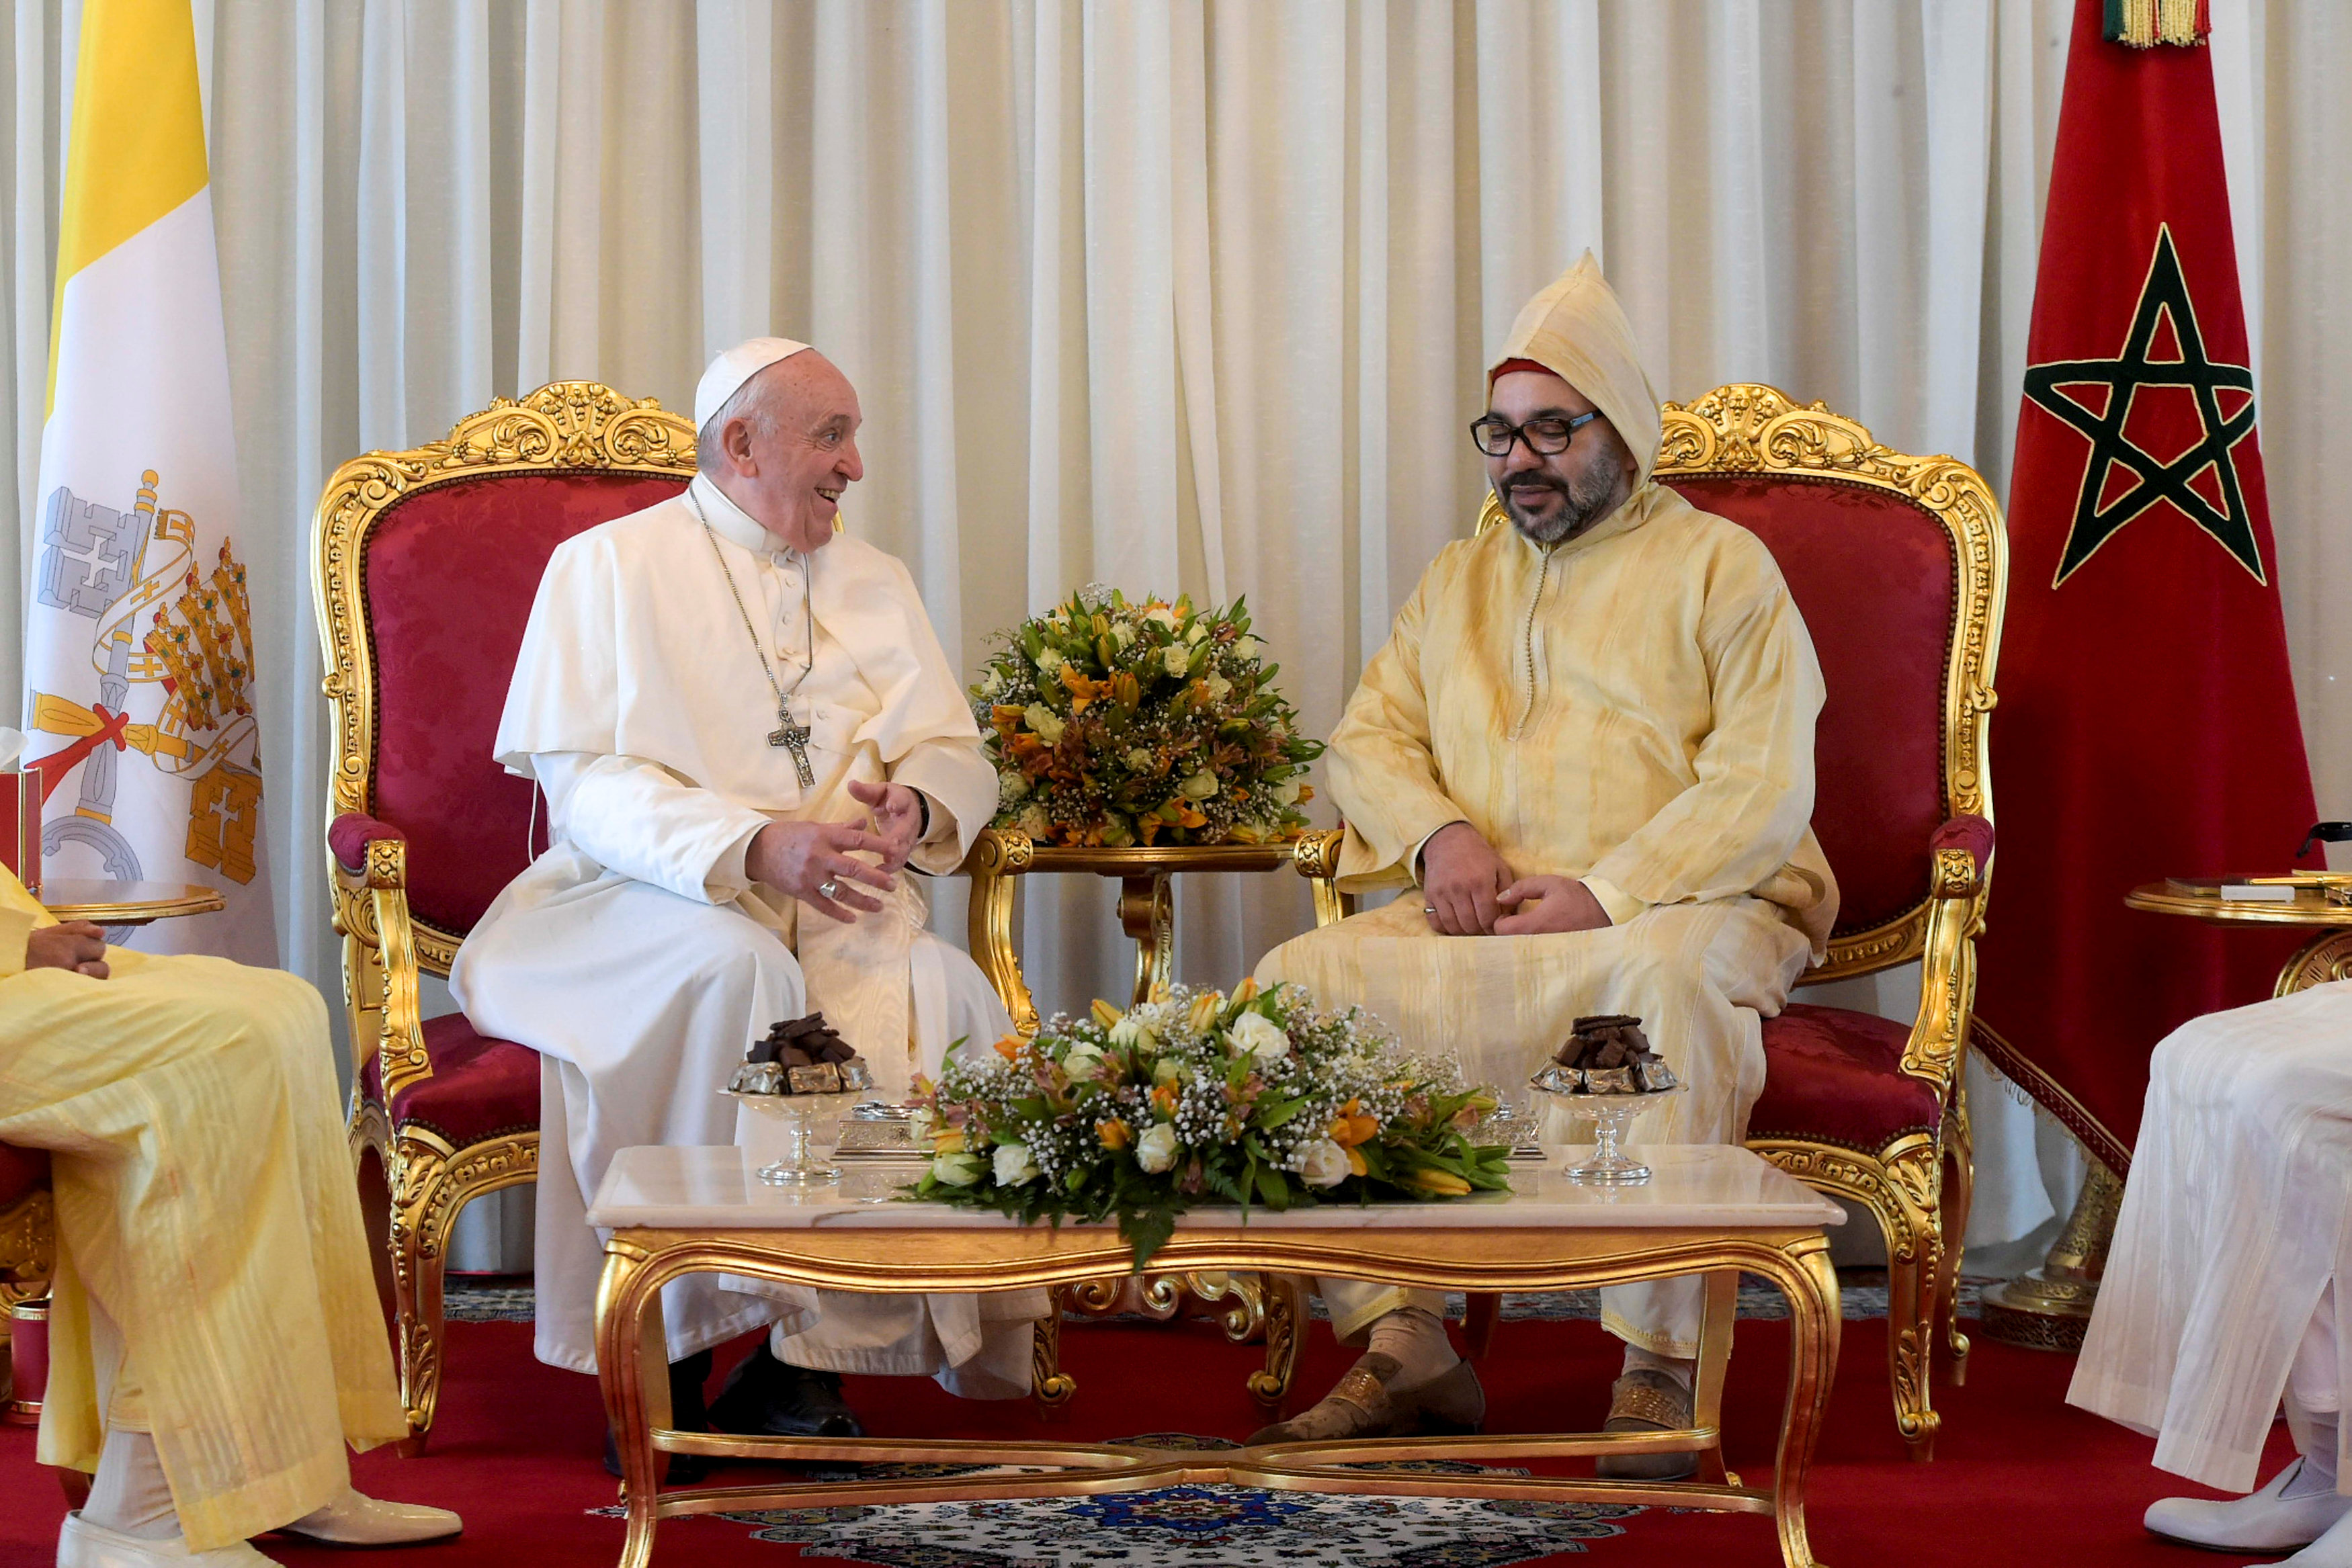 Pope Francis And Moroccan King Sign Appeal Urging That Jerusalem Remain